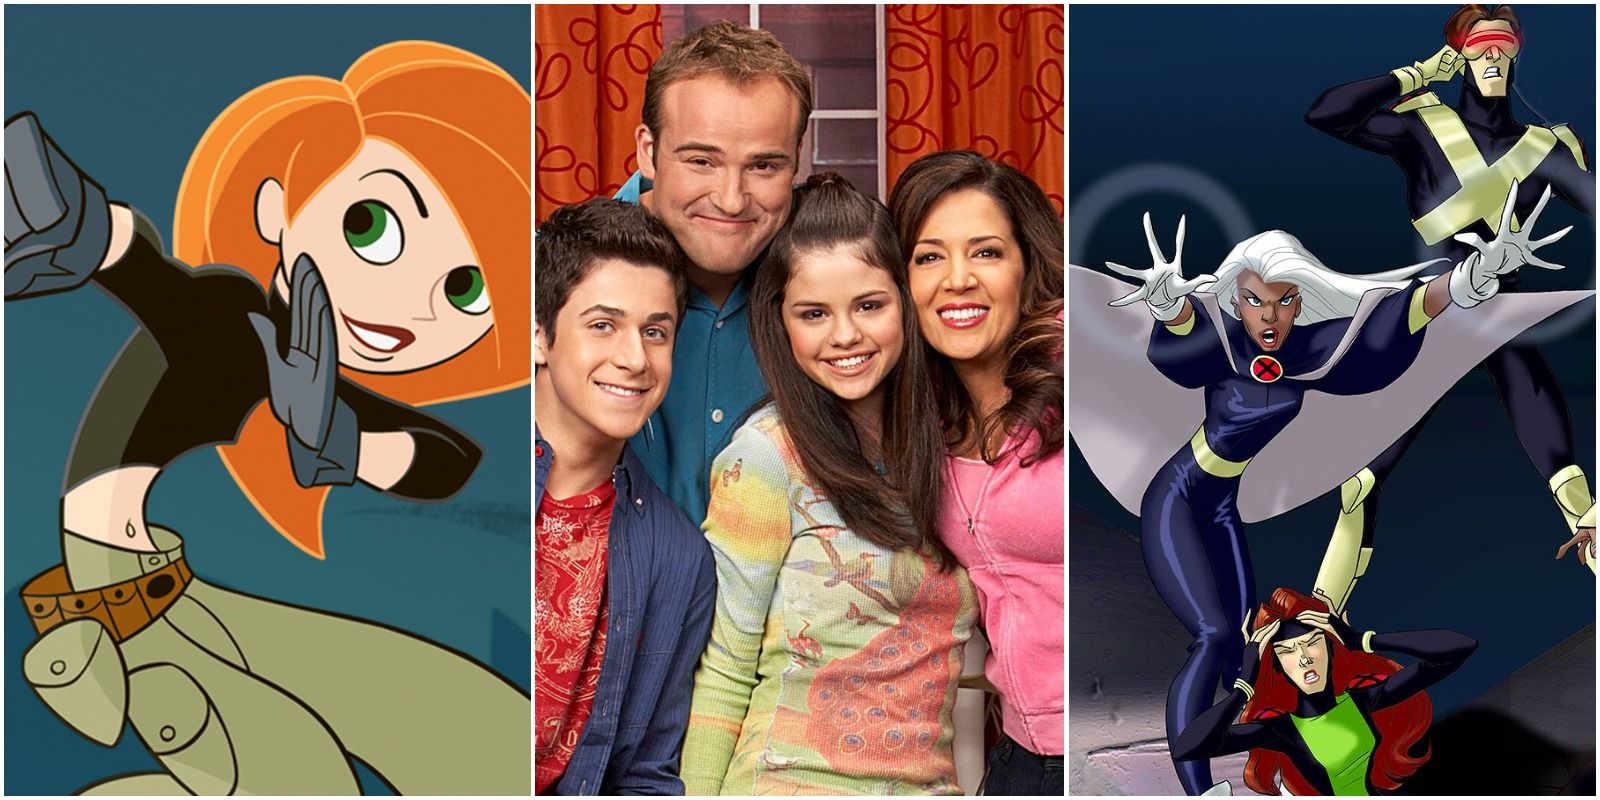 Top 10 Tv Shows From The 2000s On Disney To Watch According To Imdb